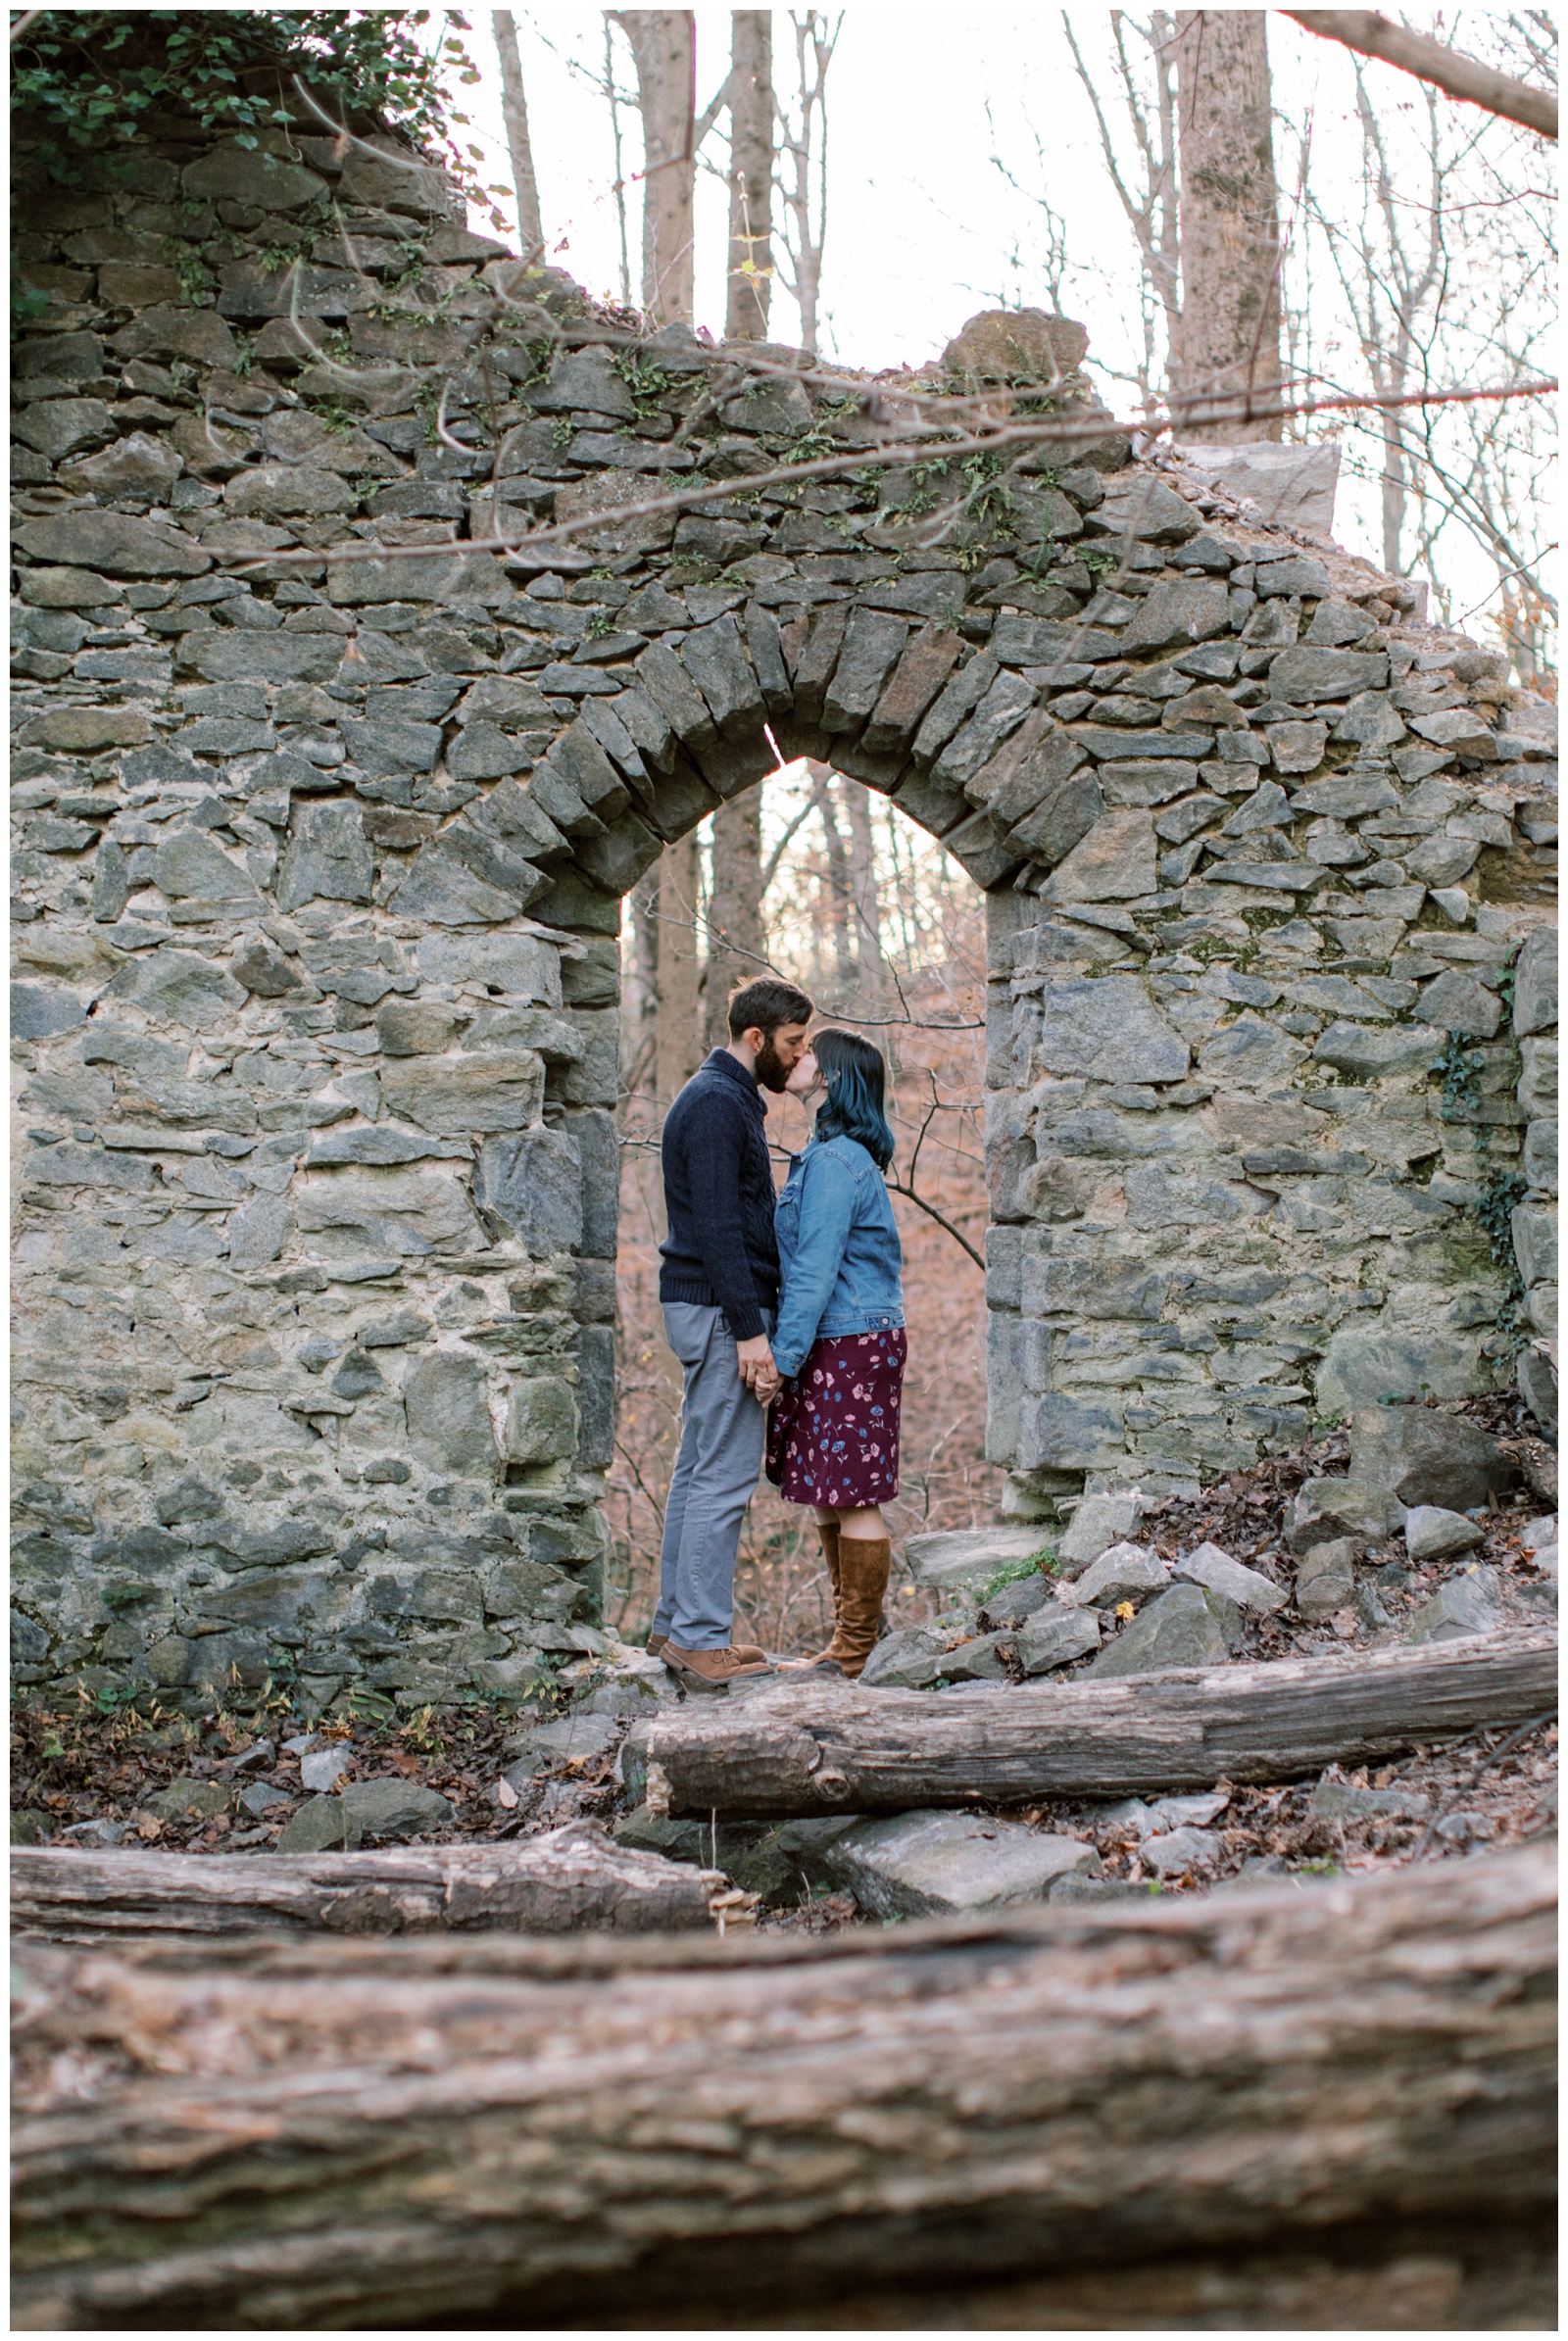 How To Choose A Unique Engagement Session Location - The Ruins At Patapsco State Park - Maryland Engagement Photography